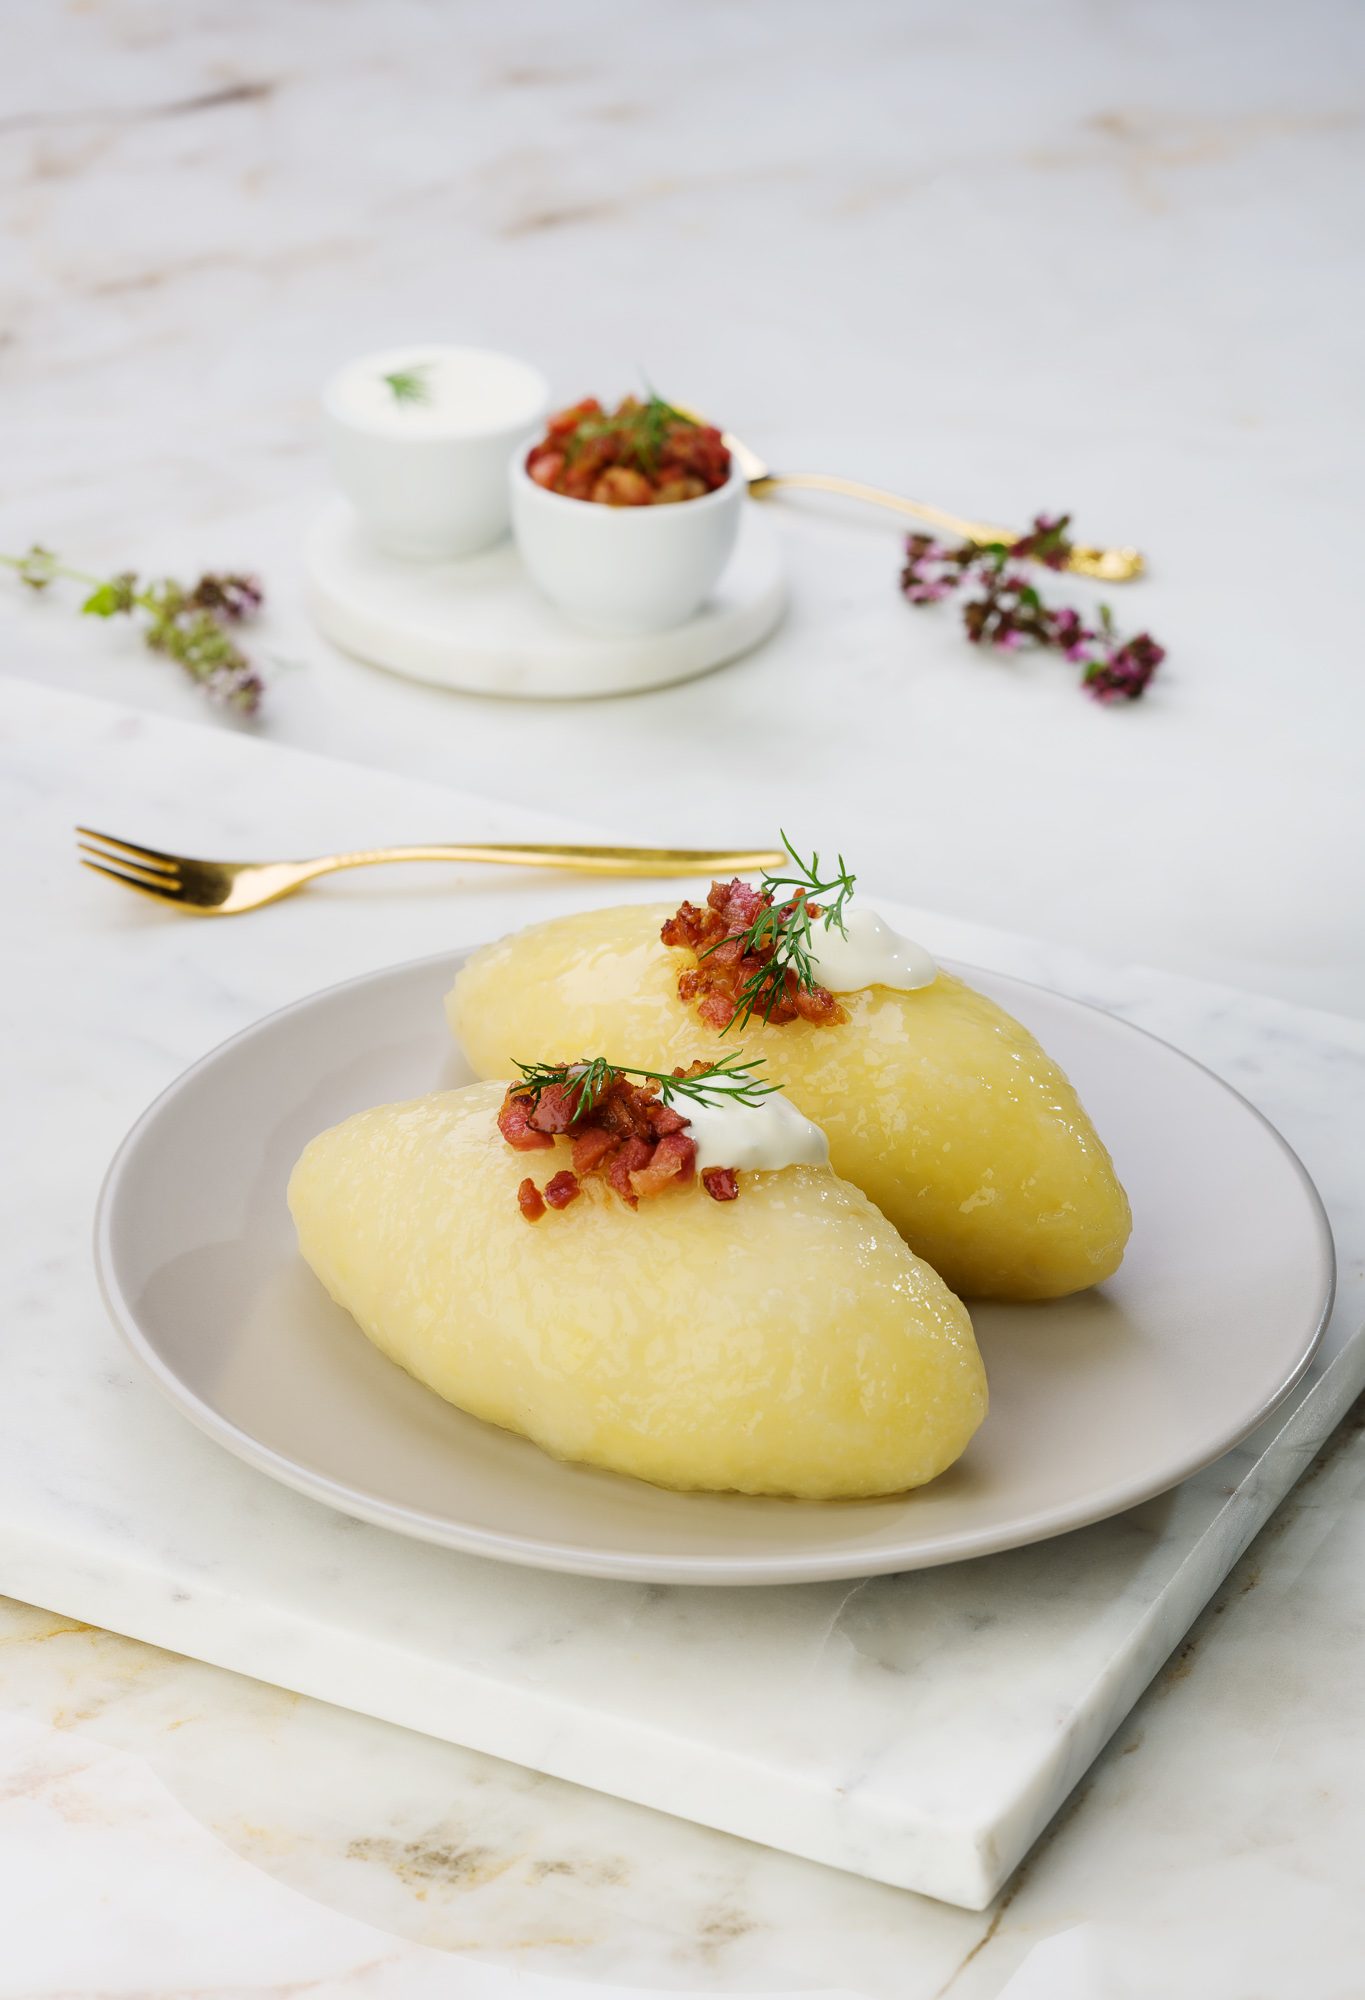 Frozen grated potato zeppelins with meat